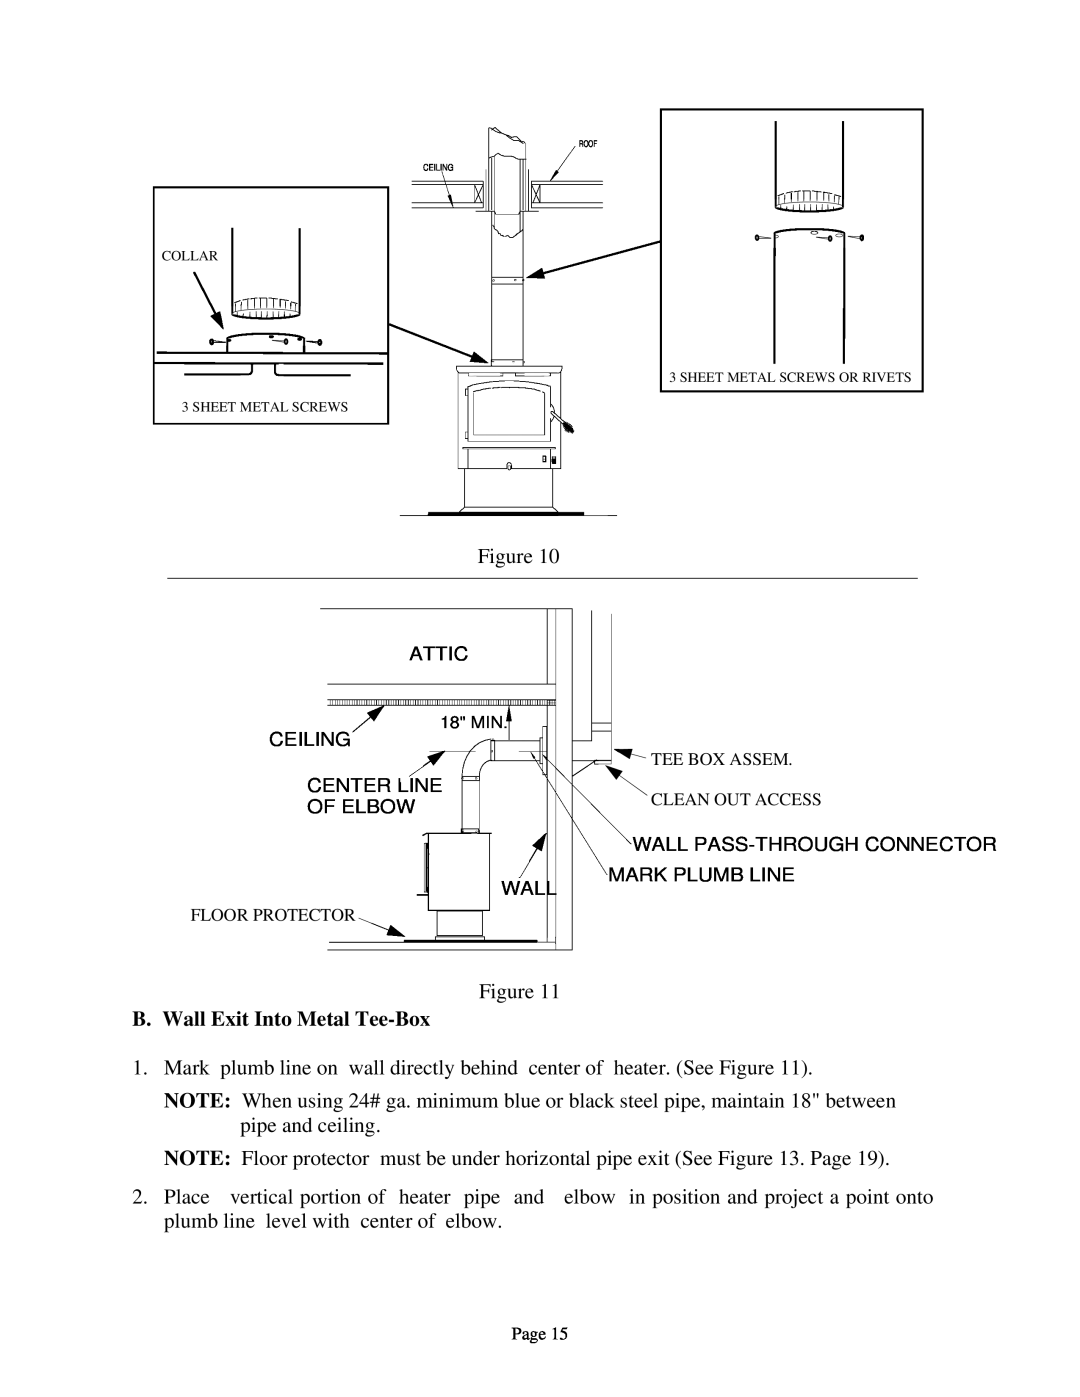 New Buck Corporation 94NC installation instructions B. Wall Exit Into Metal Tee-Box 